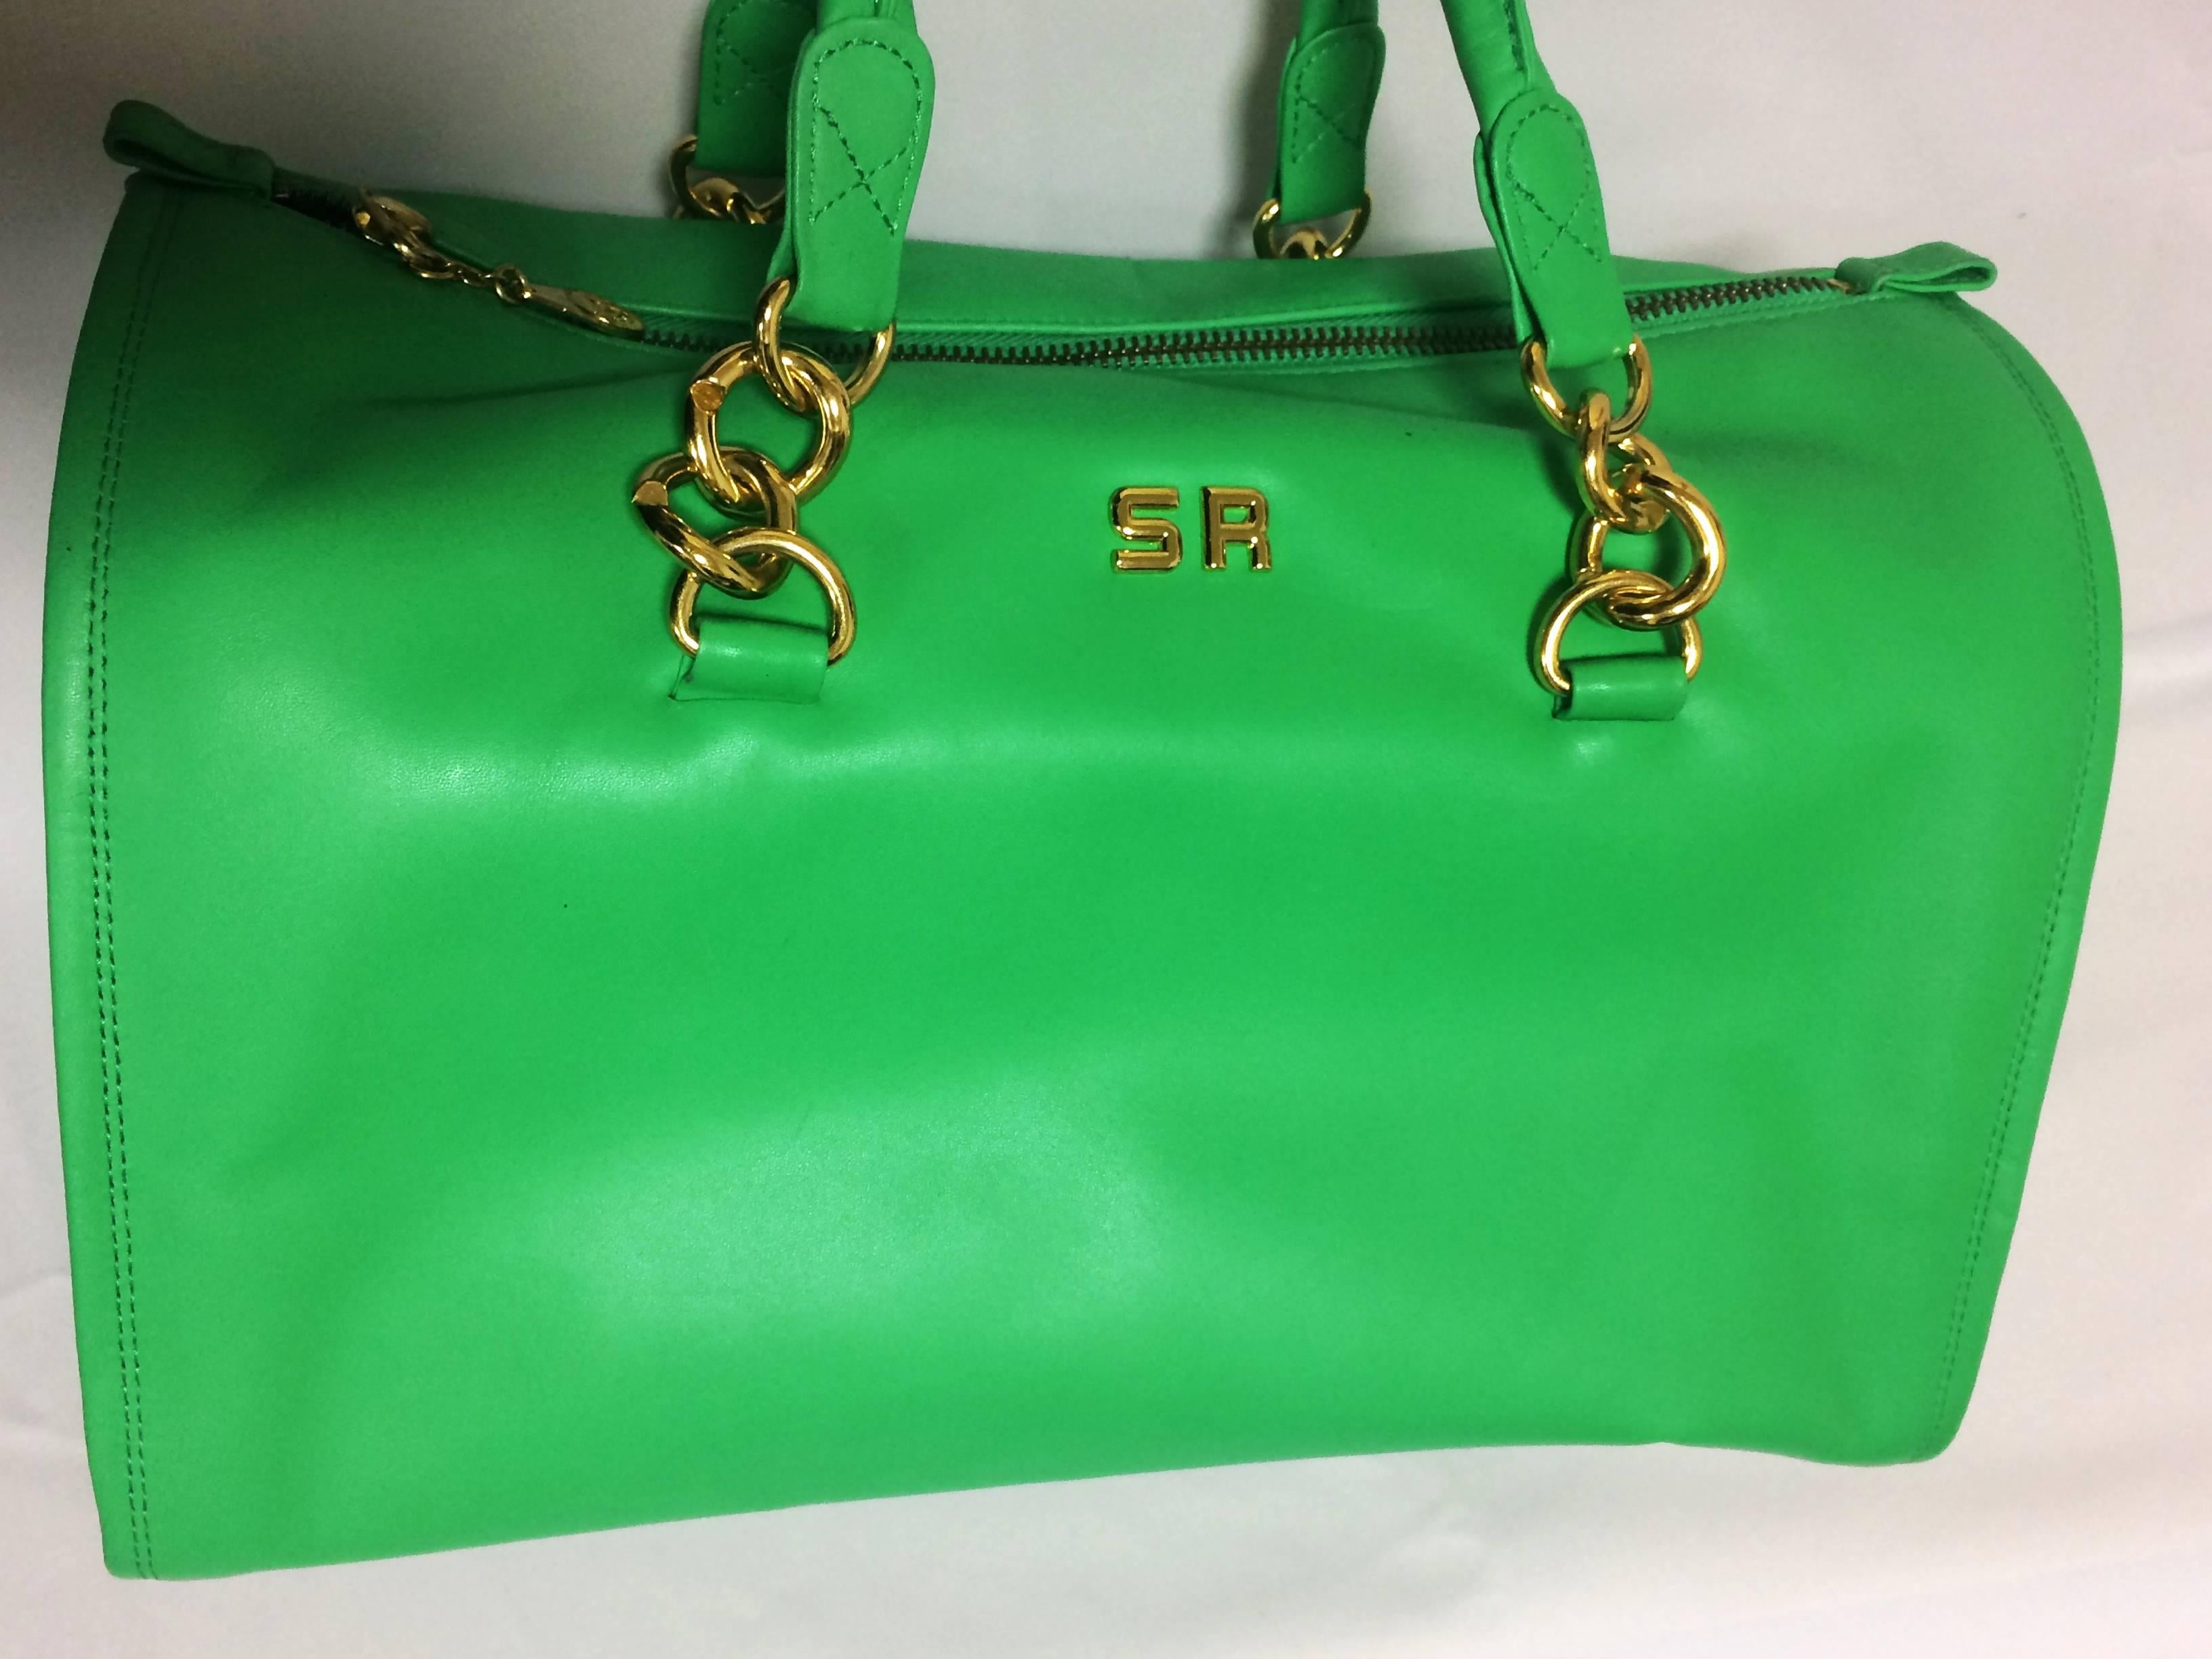 1990s. Vintage SONIA RYKIEL green leather handbag purse in speedy bag style with gold tone logo. Great daily use bag.

Th is one of the most chic and stylish SONIA RYKIEL SACS back in the era!
The bright green color will be the best accent to